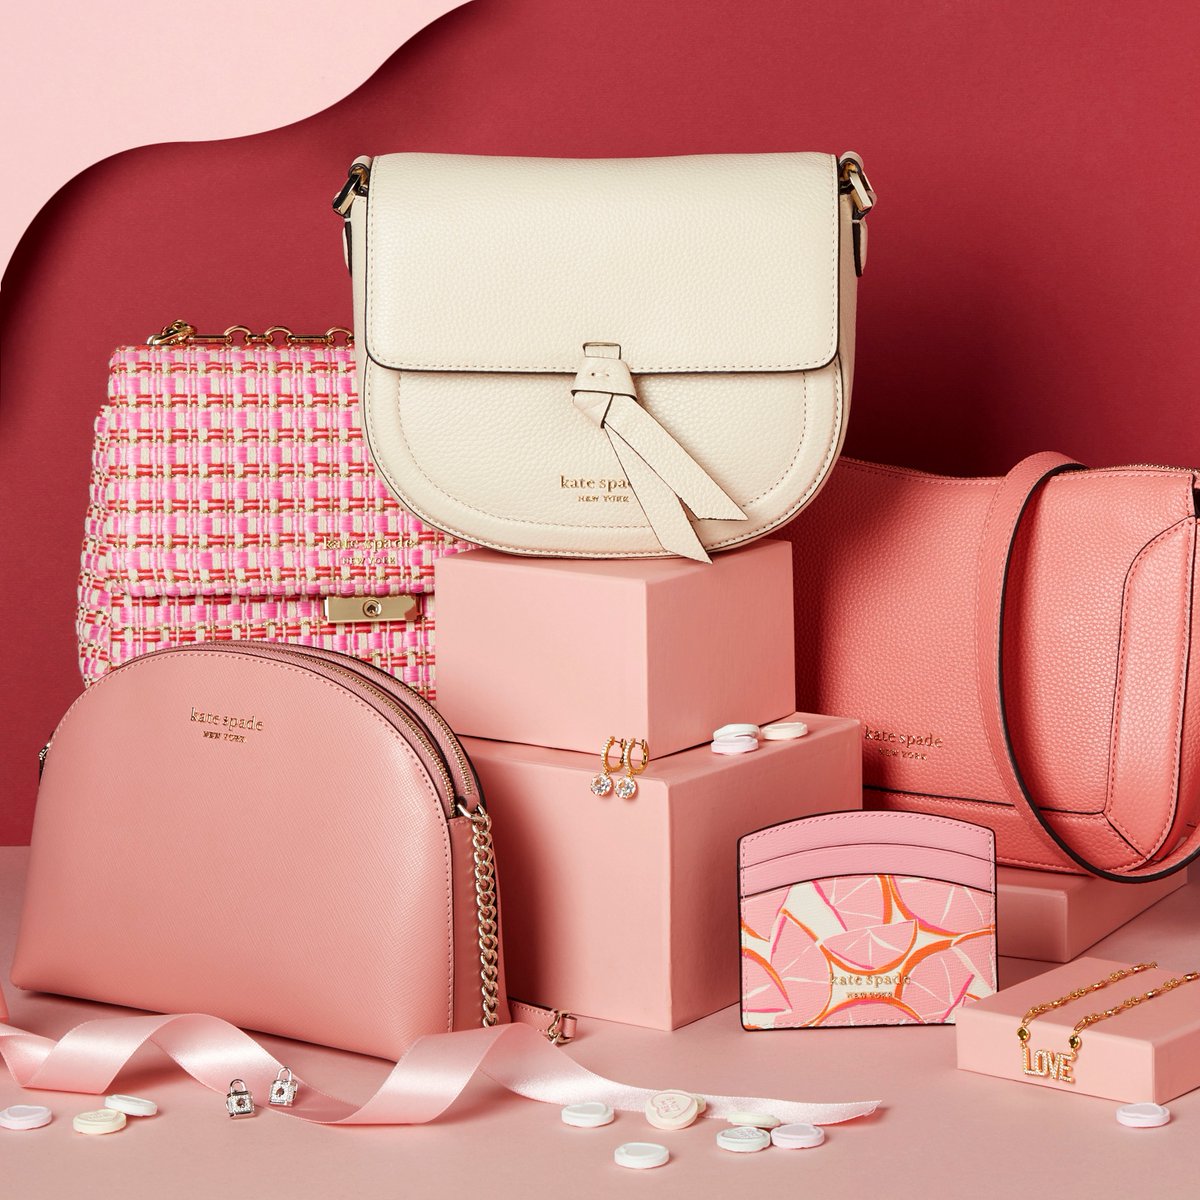 It's love at first sight with Kate Spade's wide range of wonderful gift ideas. With considered and timeless gifts to cherish, explore sparkling jewellery, standout handbags and luxury small leather goods that will be perfect for your Valentine: bit.ly/3HIA7zF